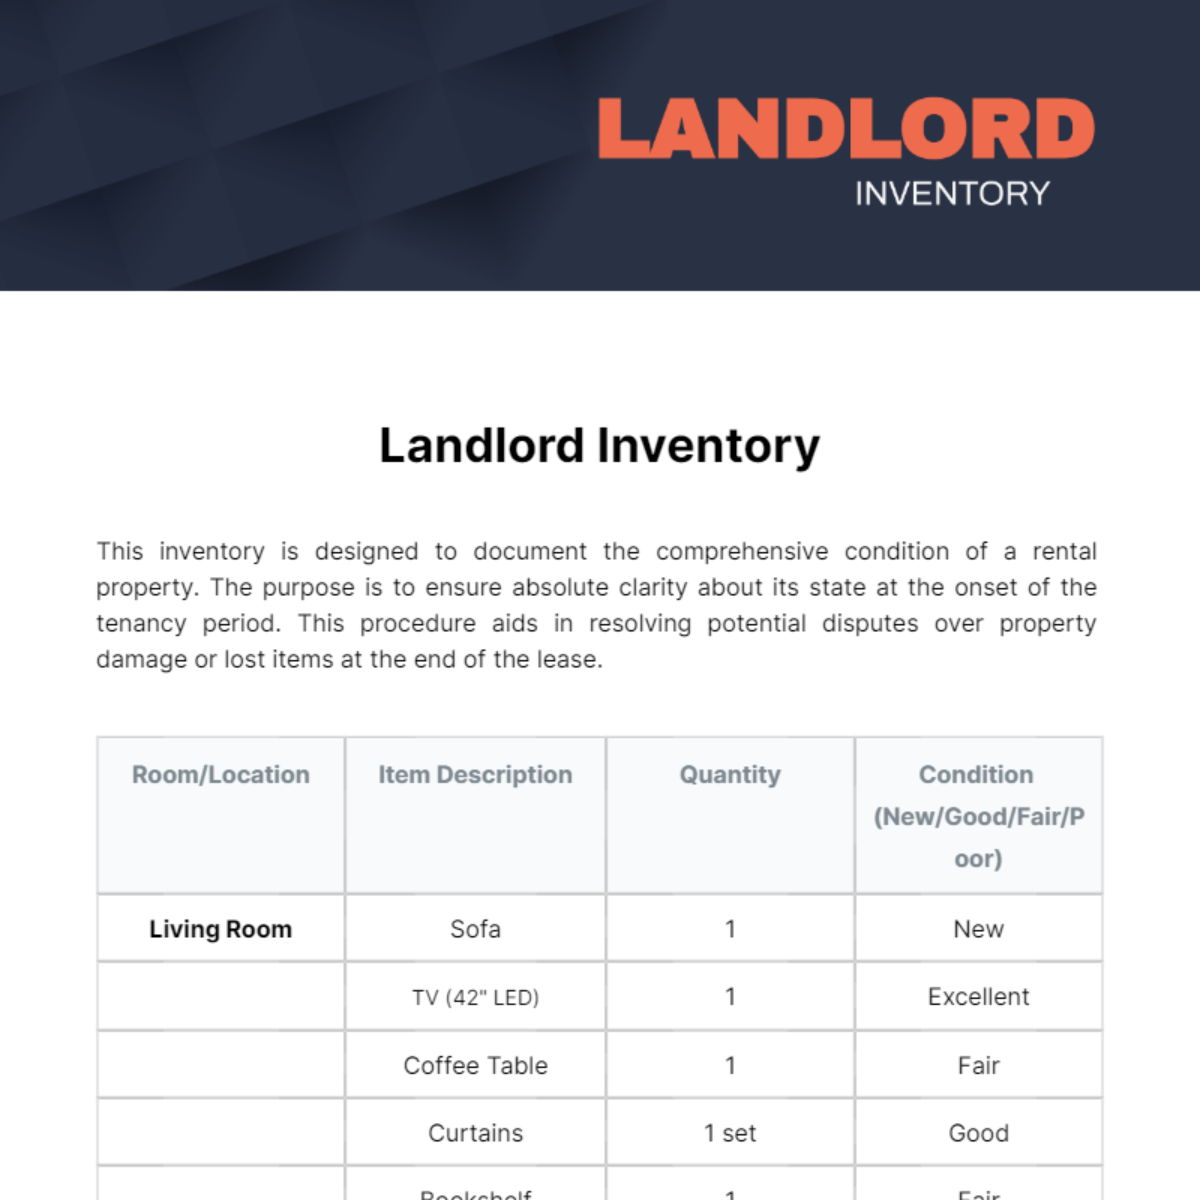 Landlord Inventory Template